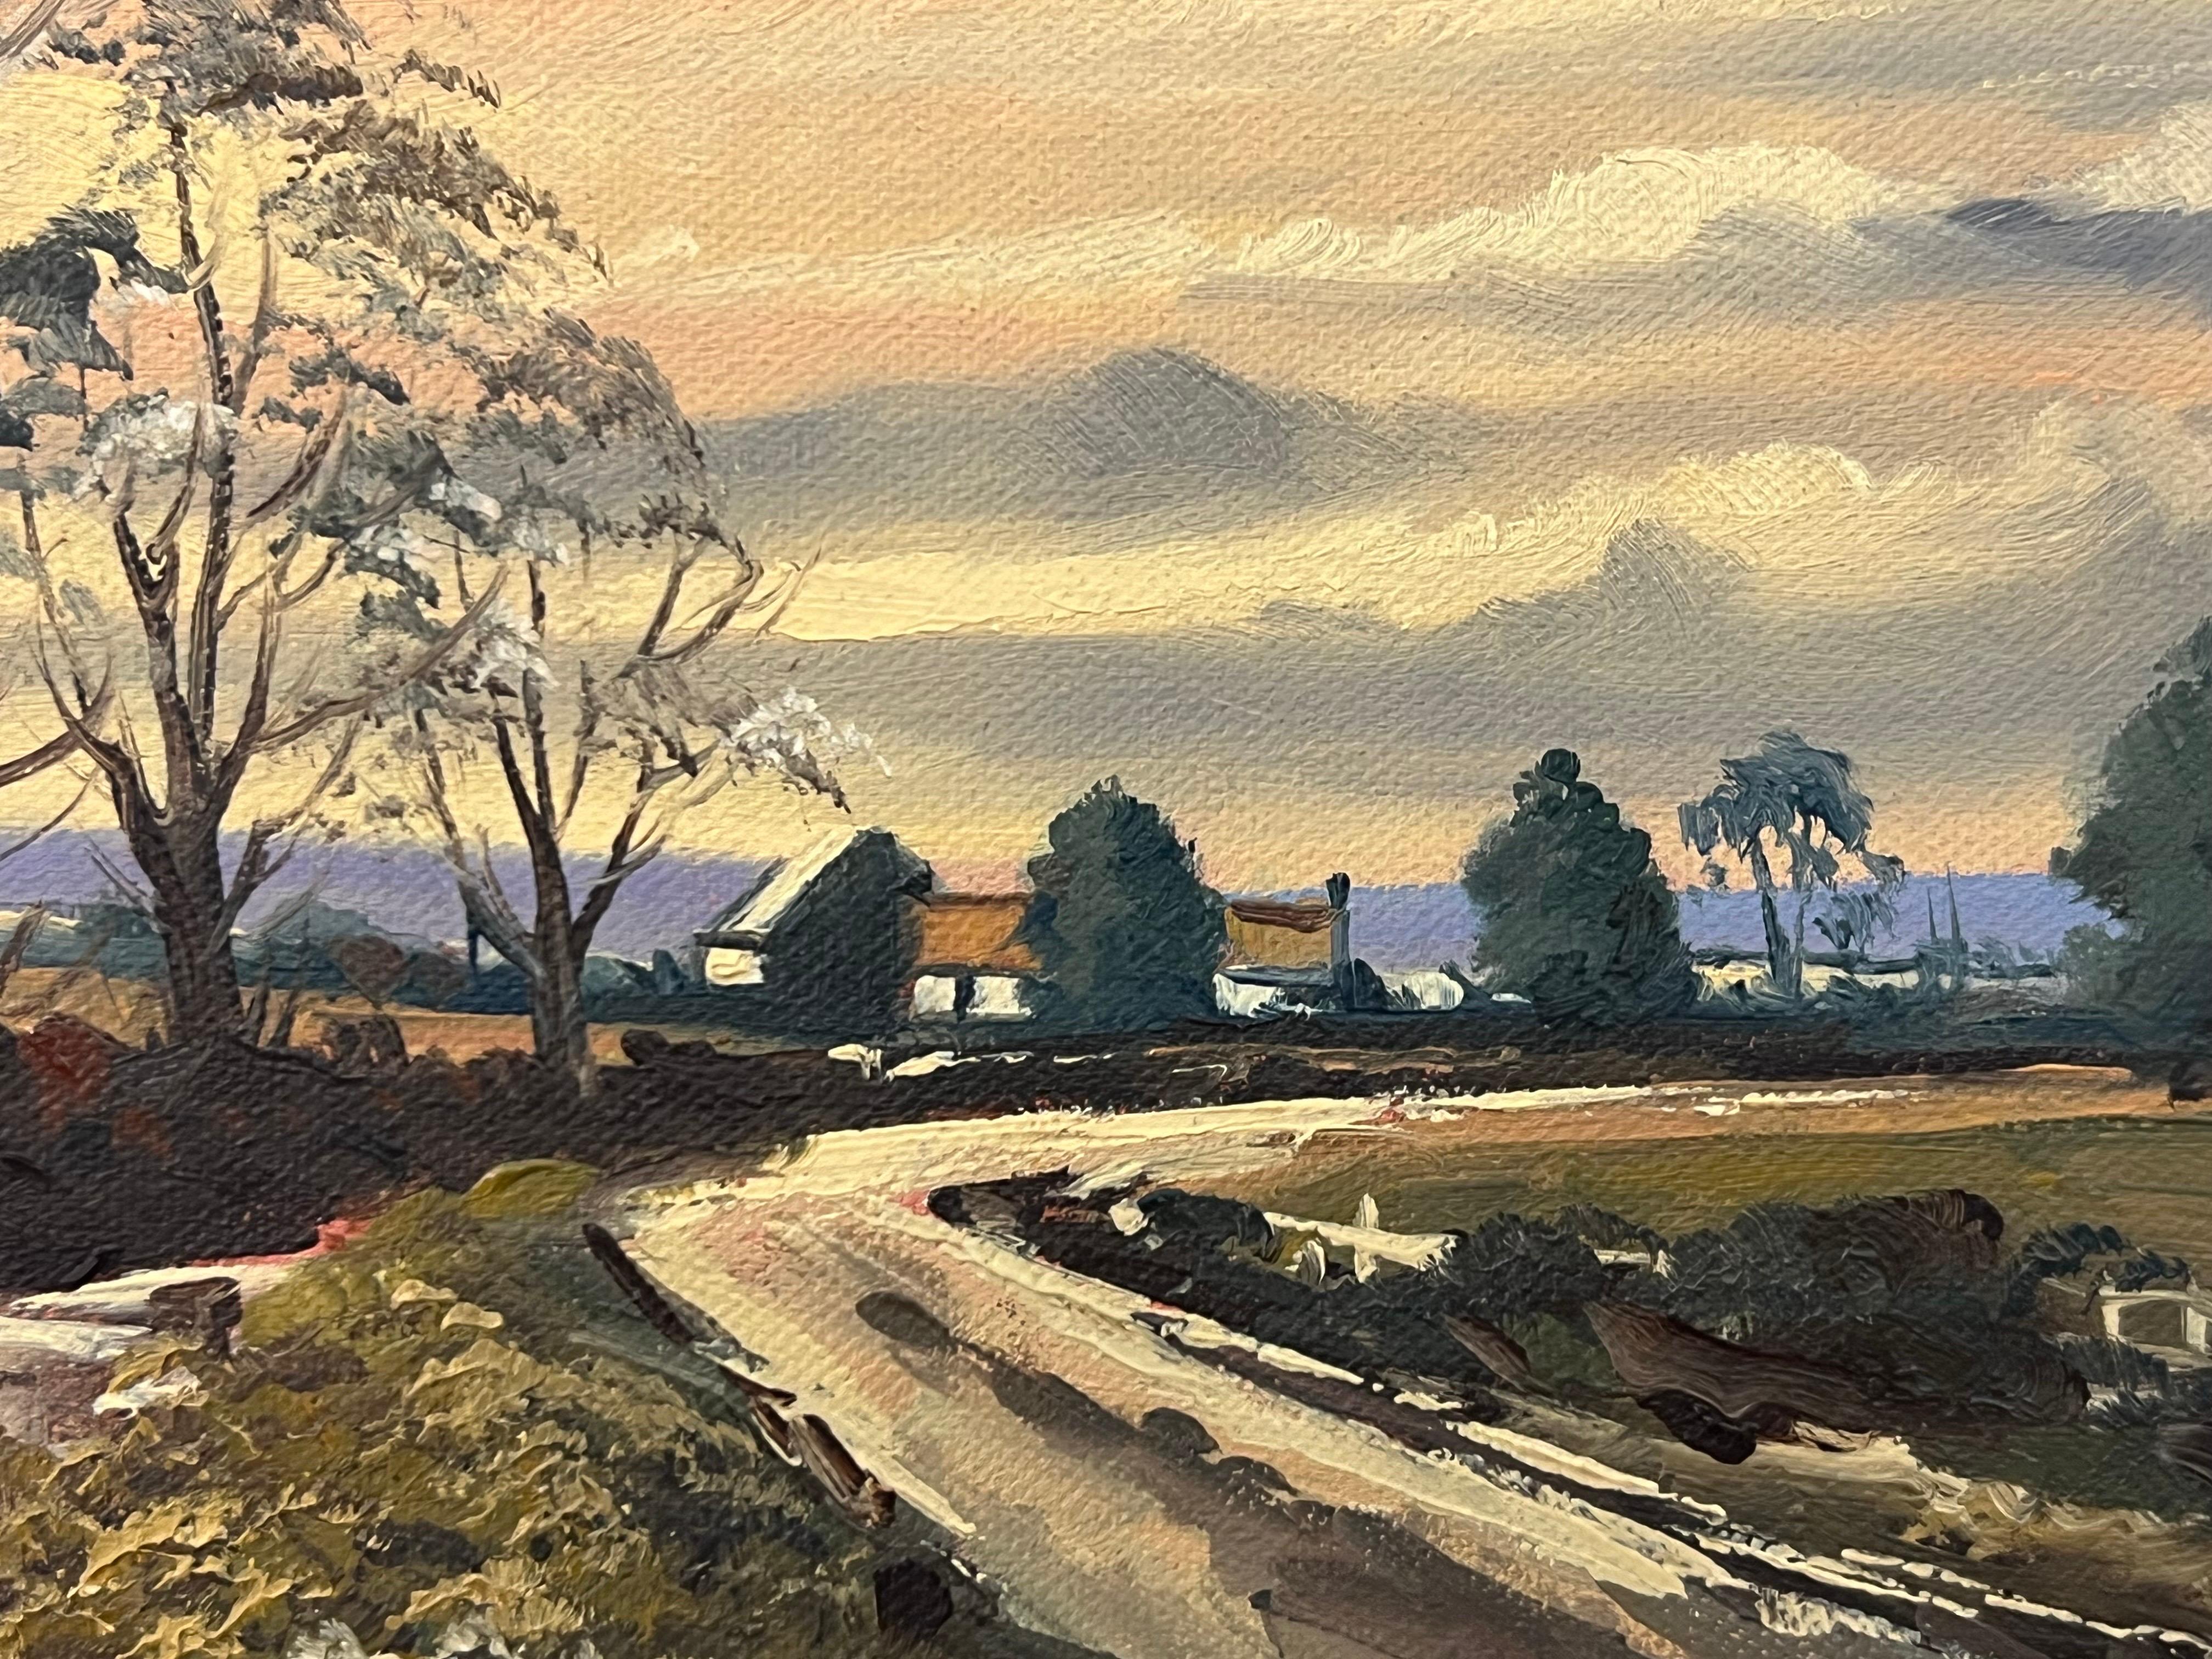 Sunset in Ireland Countryside - Original Oil Painting by Northern Irish Artist For Sale 5